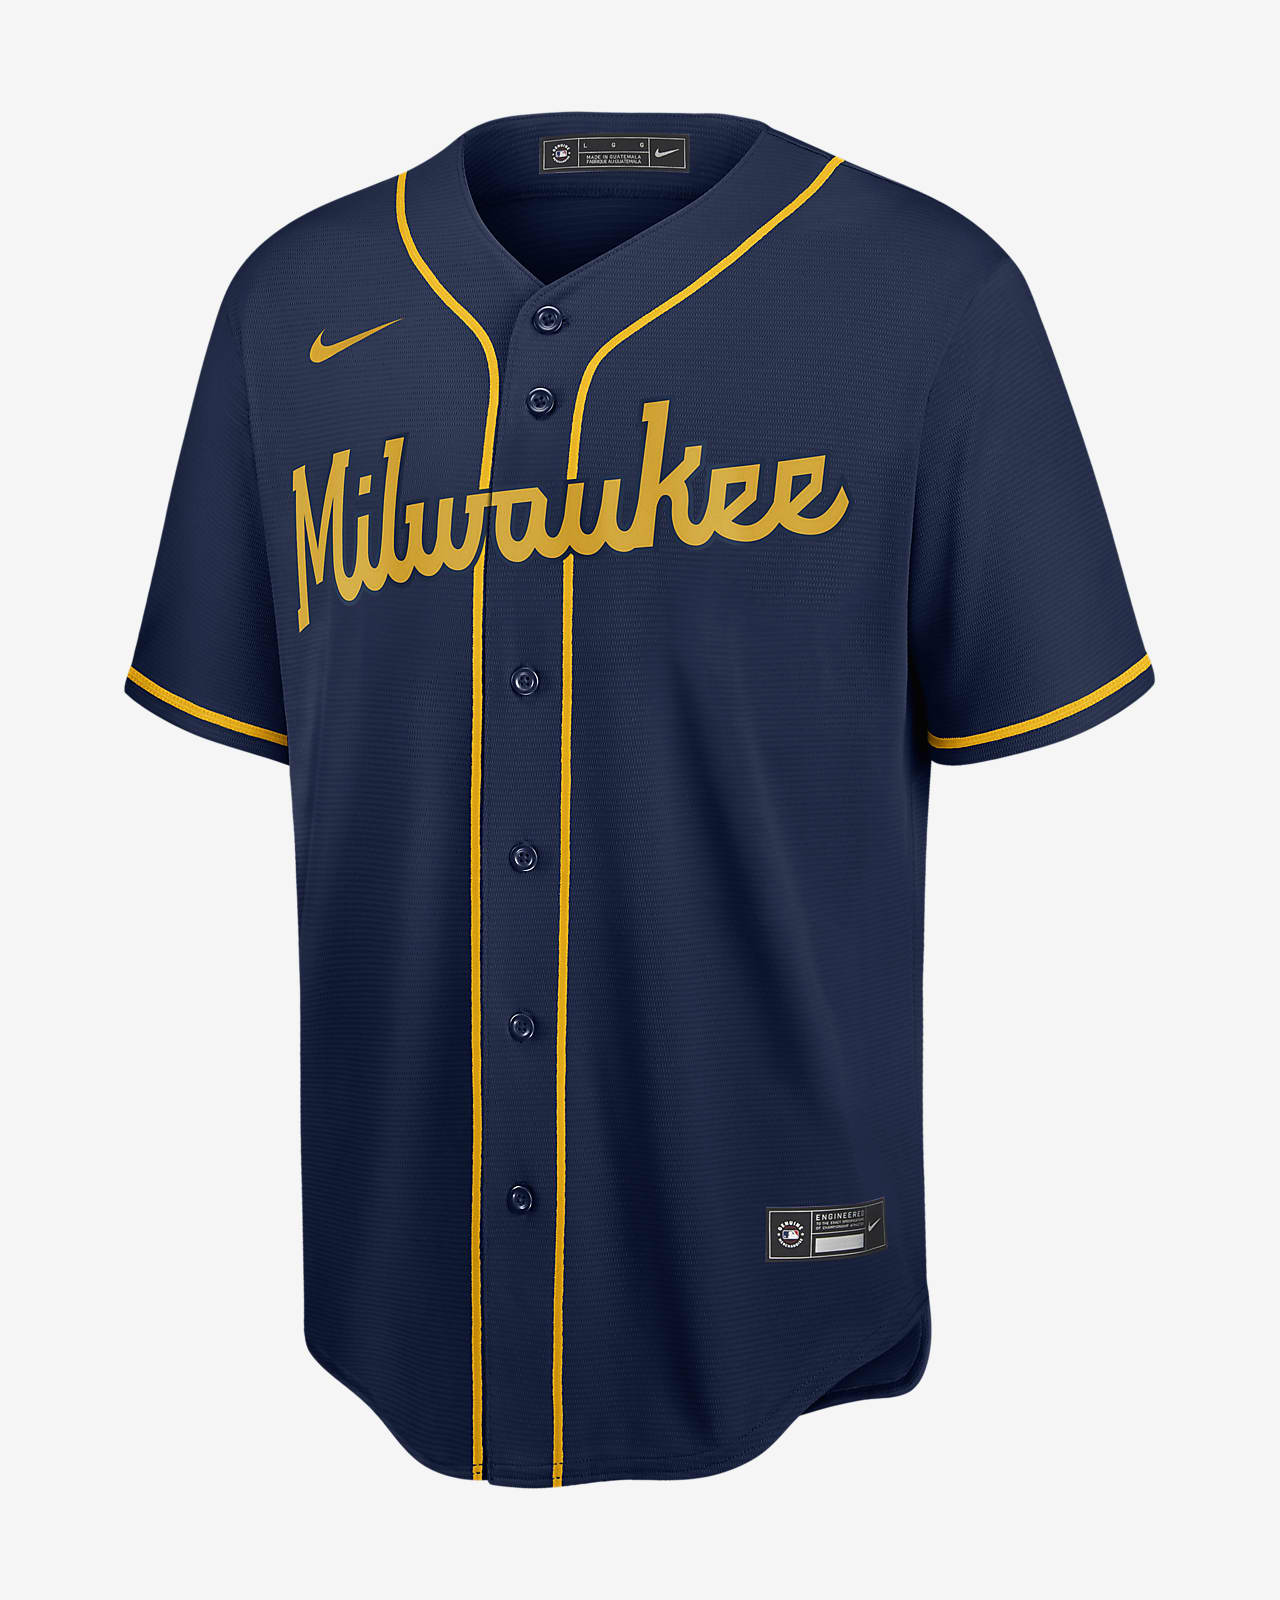 personalized brewers shirts